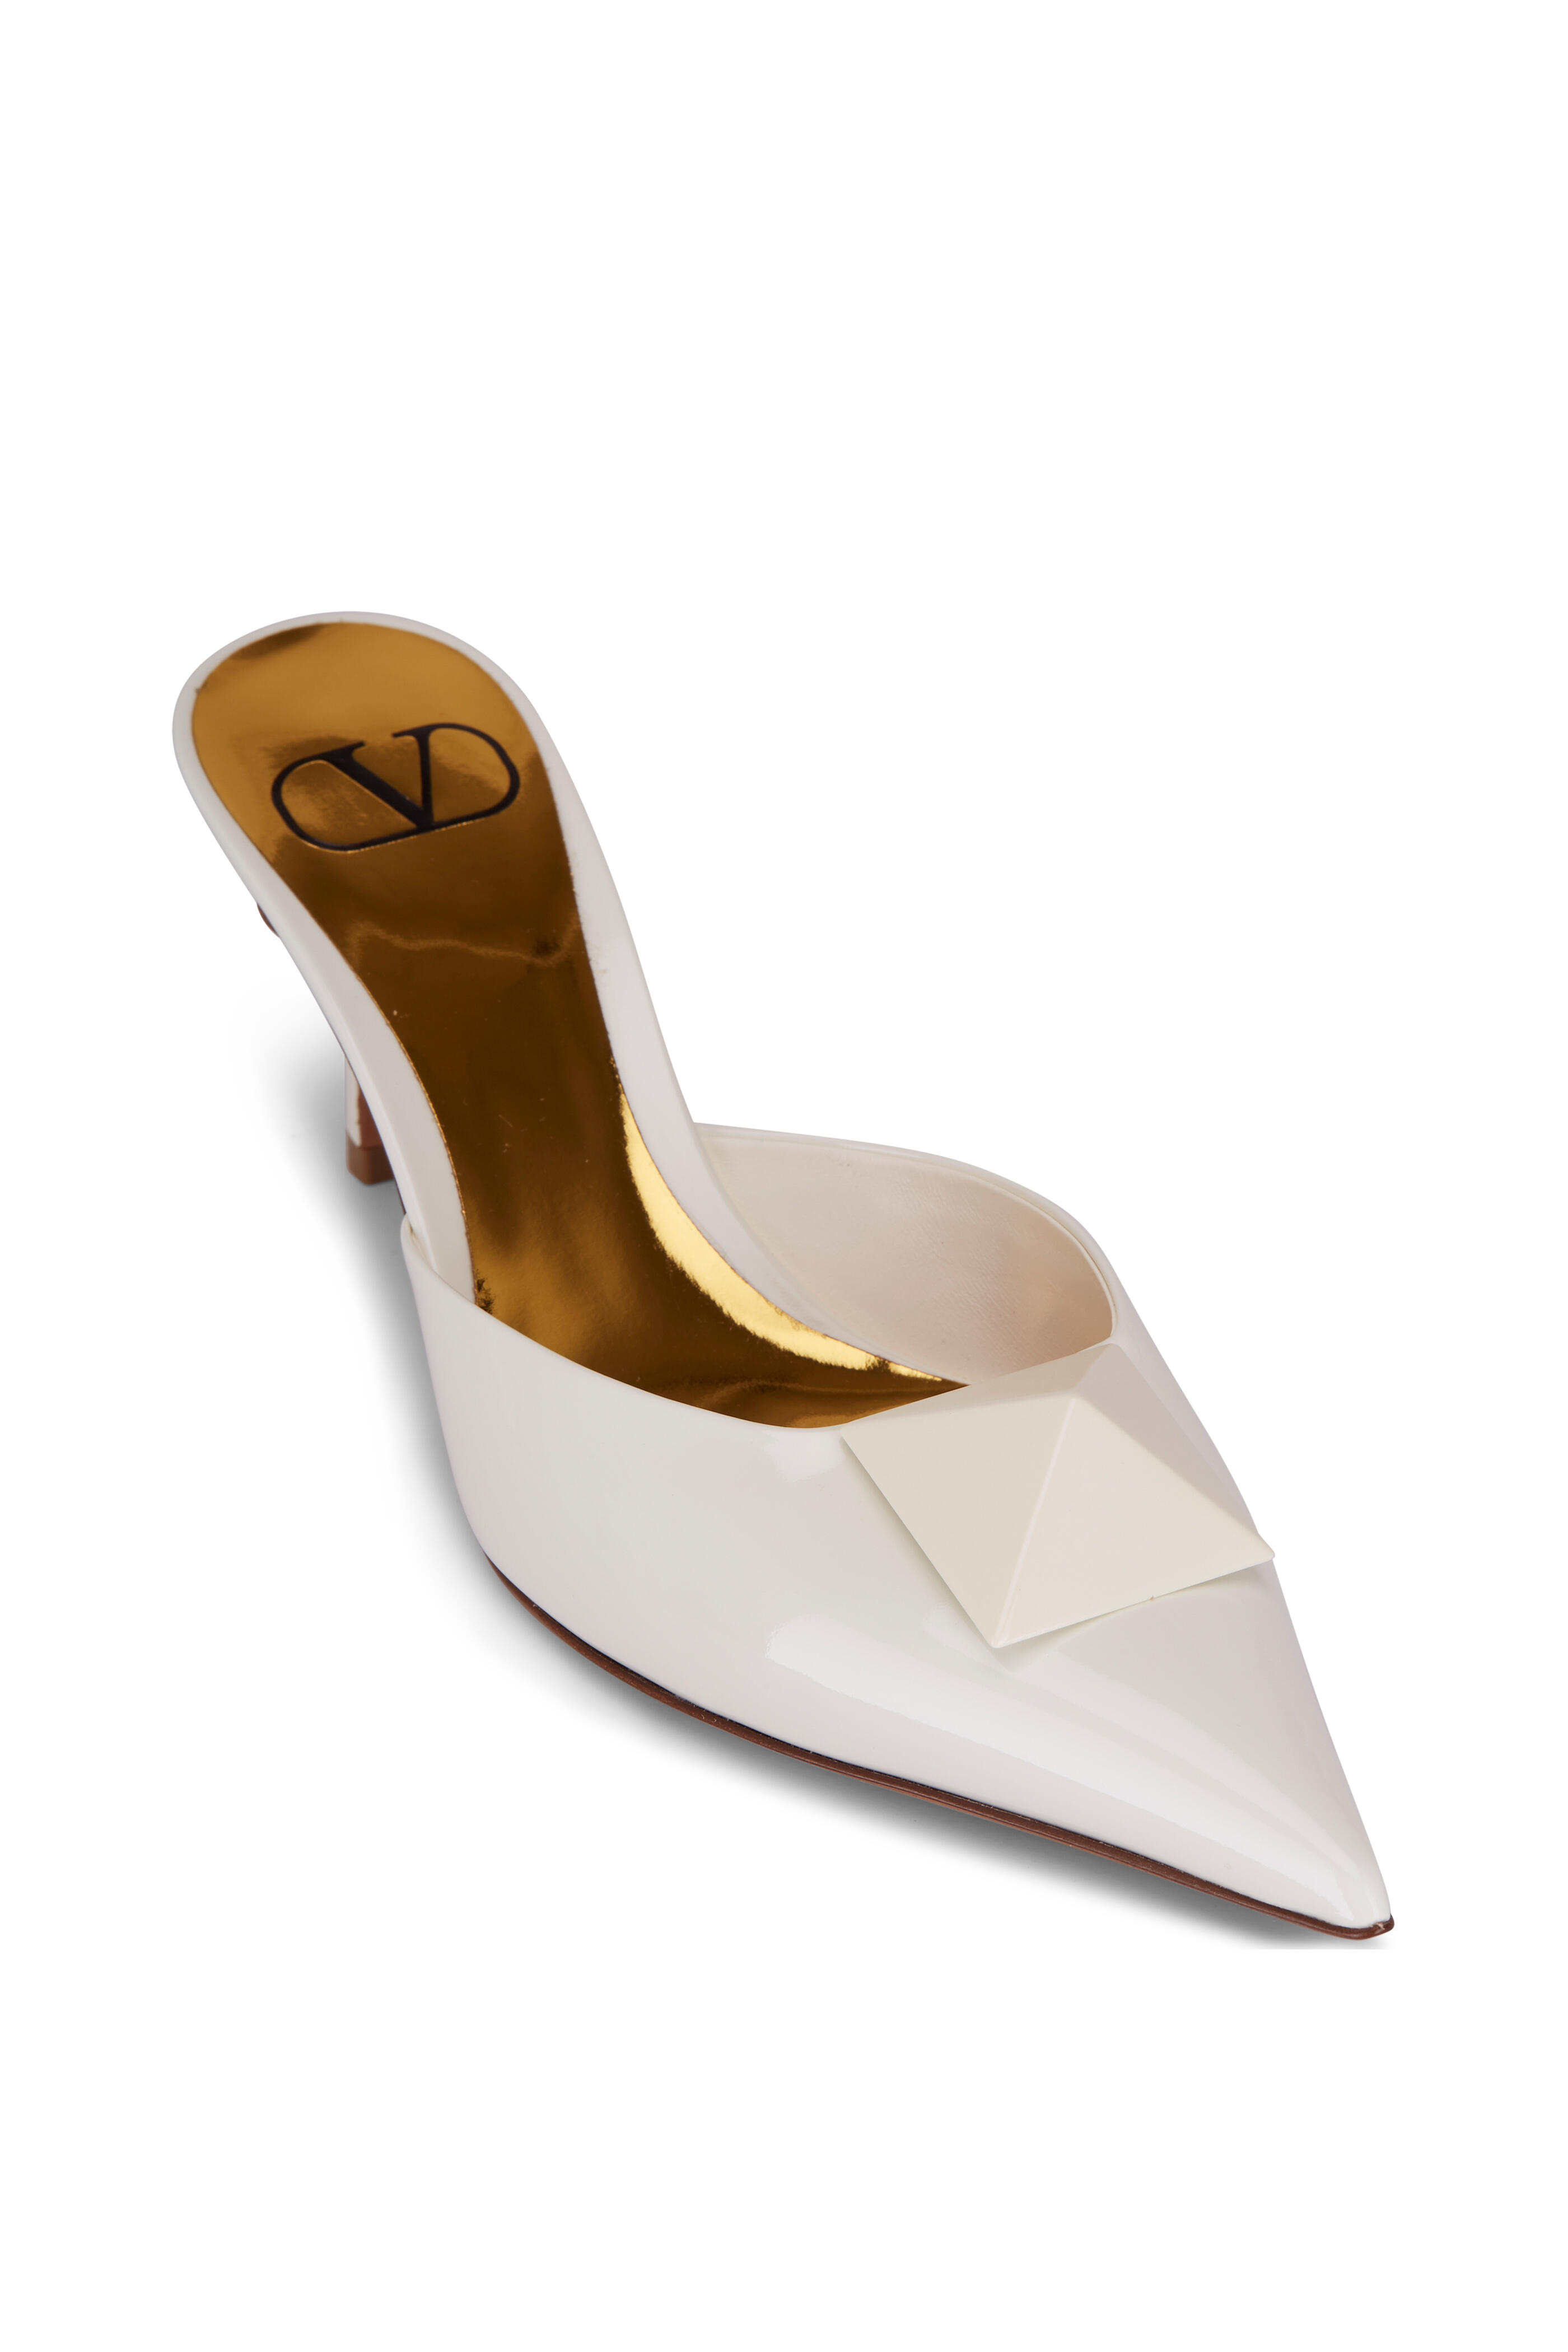 Louis Vuitton Womens Pointed Toe Pumps & Mules